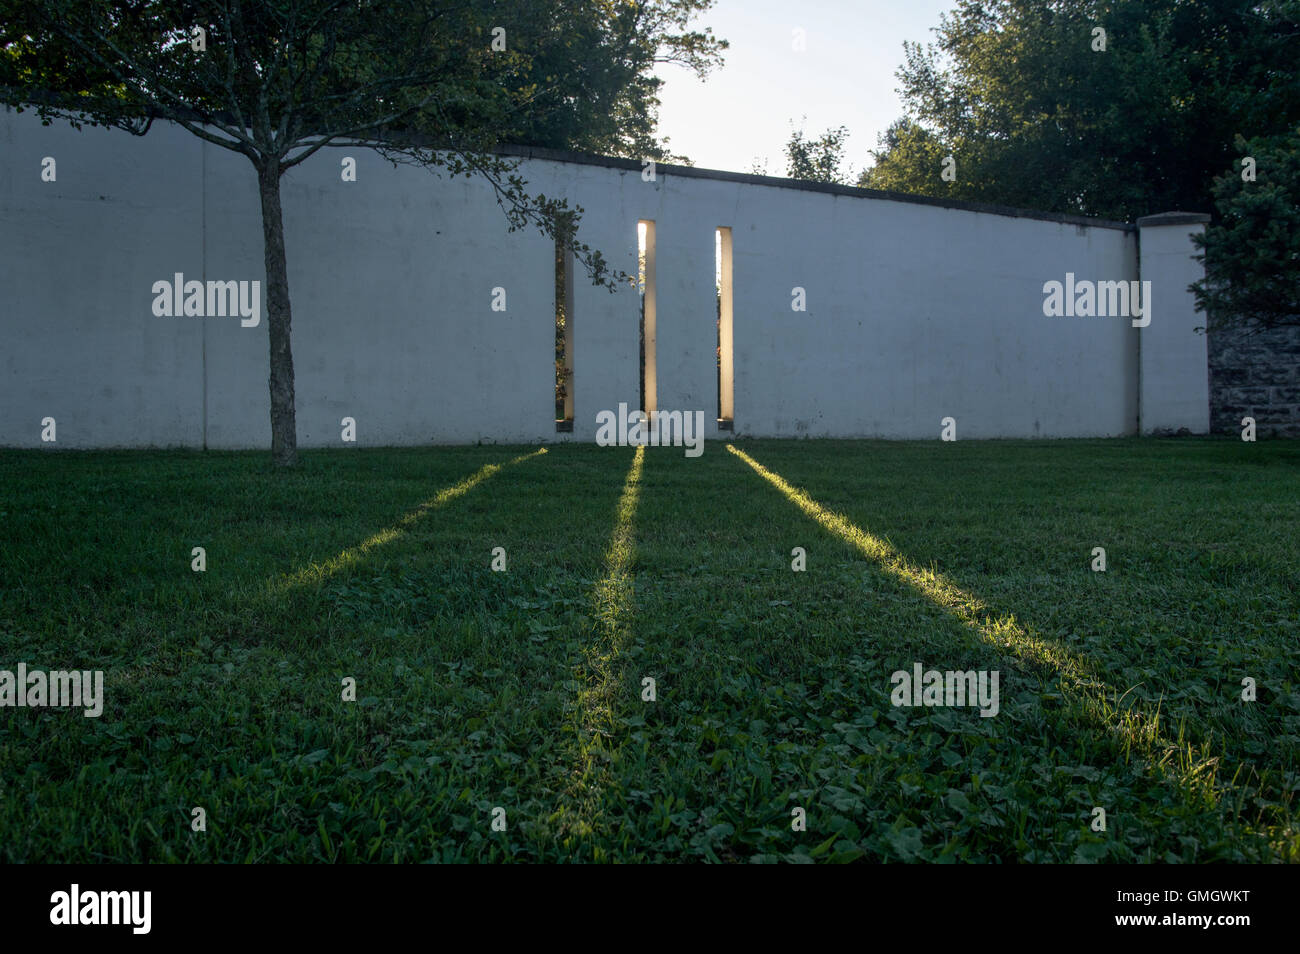 Light breaks through openings in a wall at the monks' garden at the Abbey of Gethsemani, a Trappist monastery in Kentucky Stock Photo